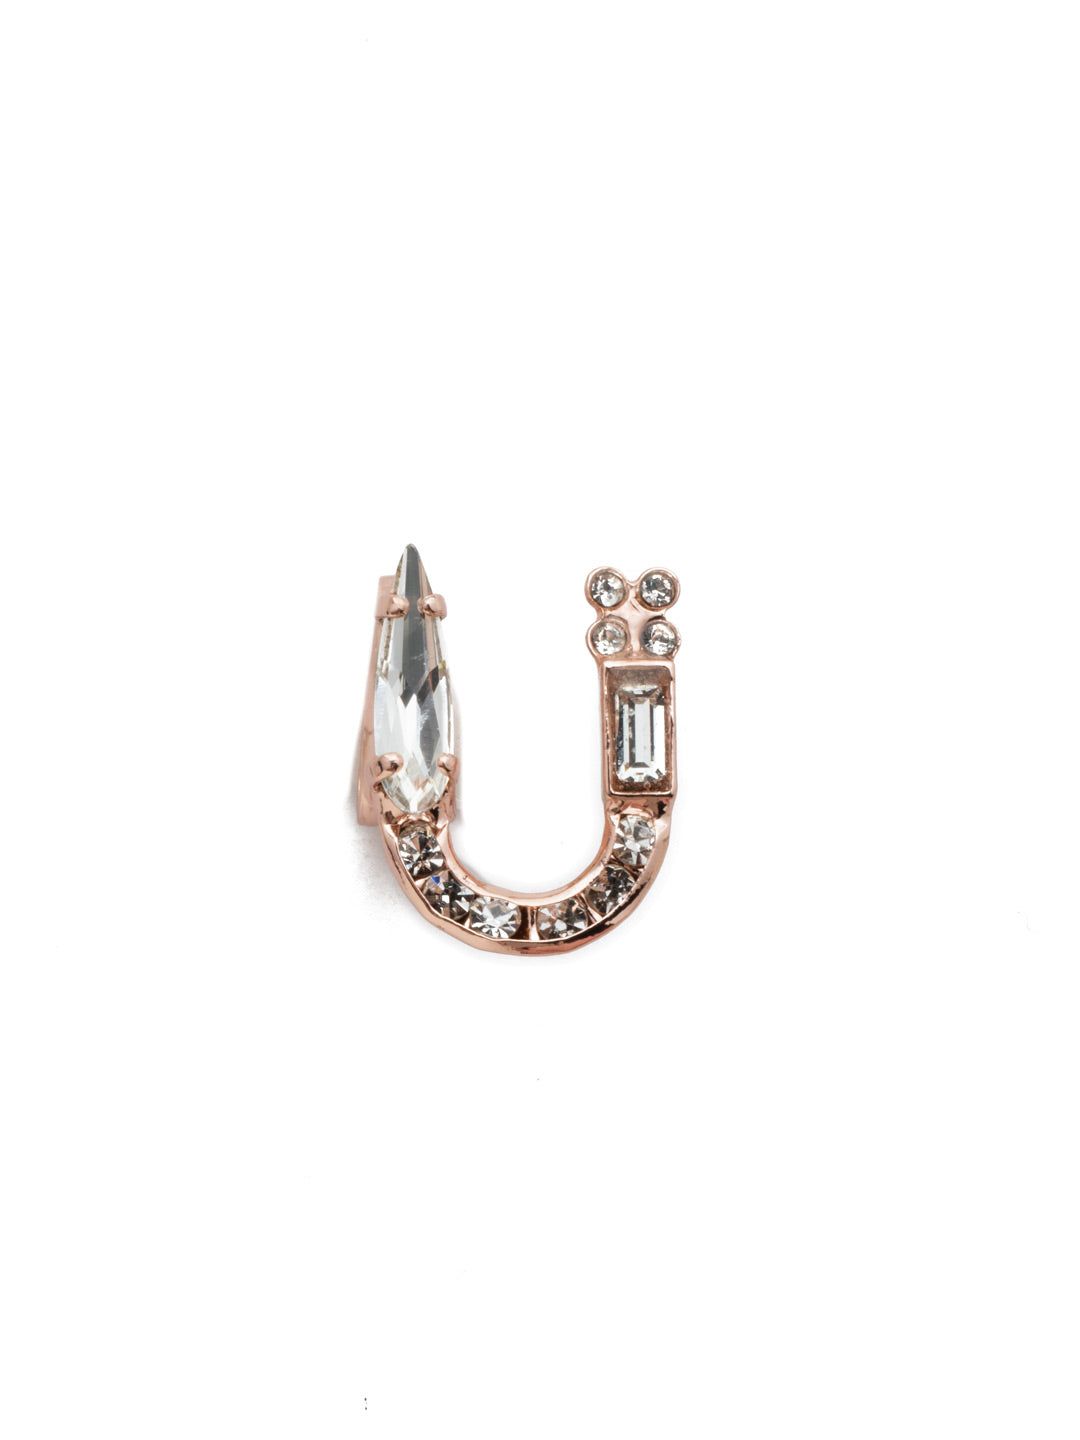 Product Image: Crystal Charm 'U' Charm Other Accessory